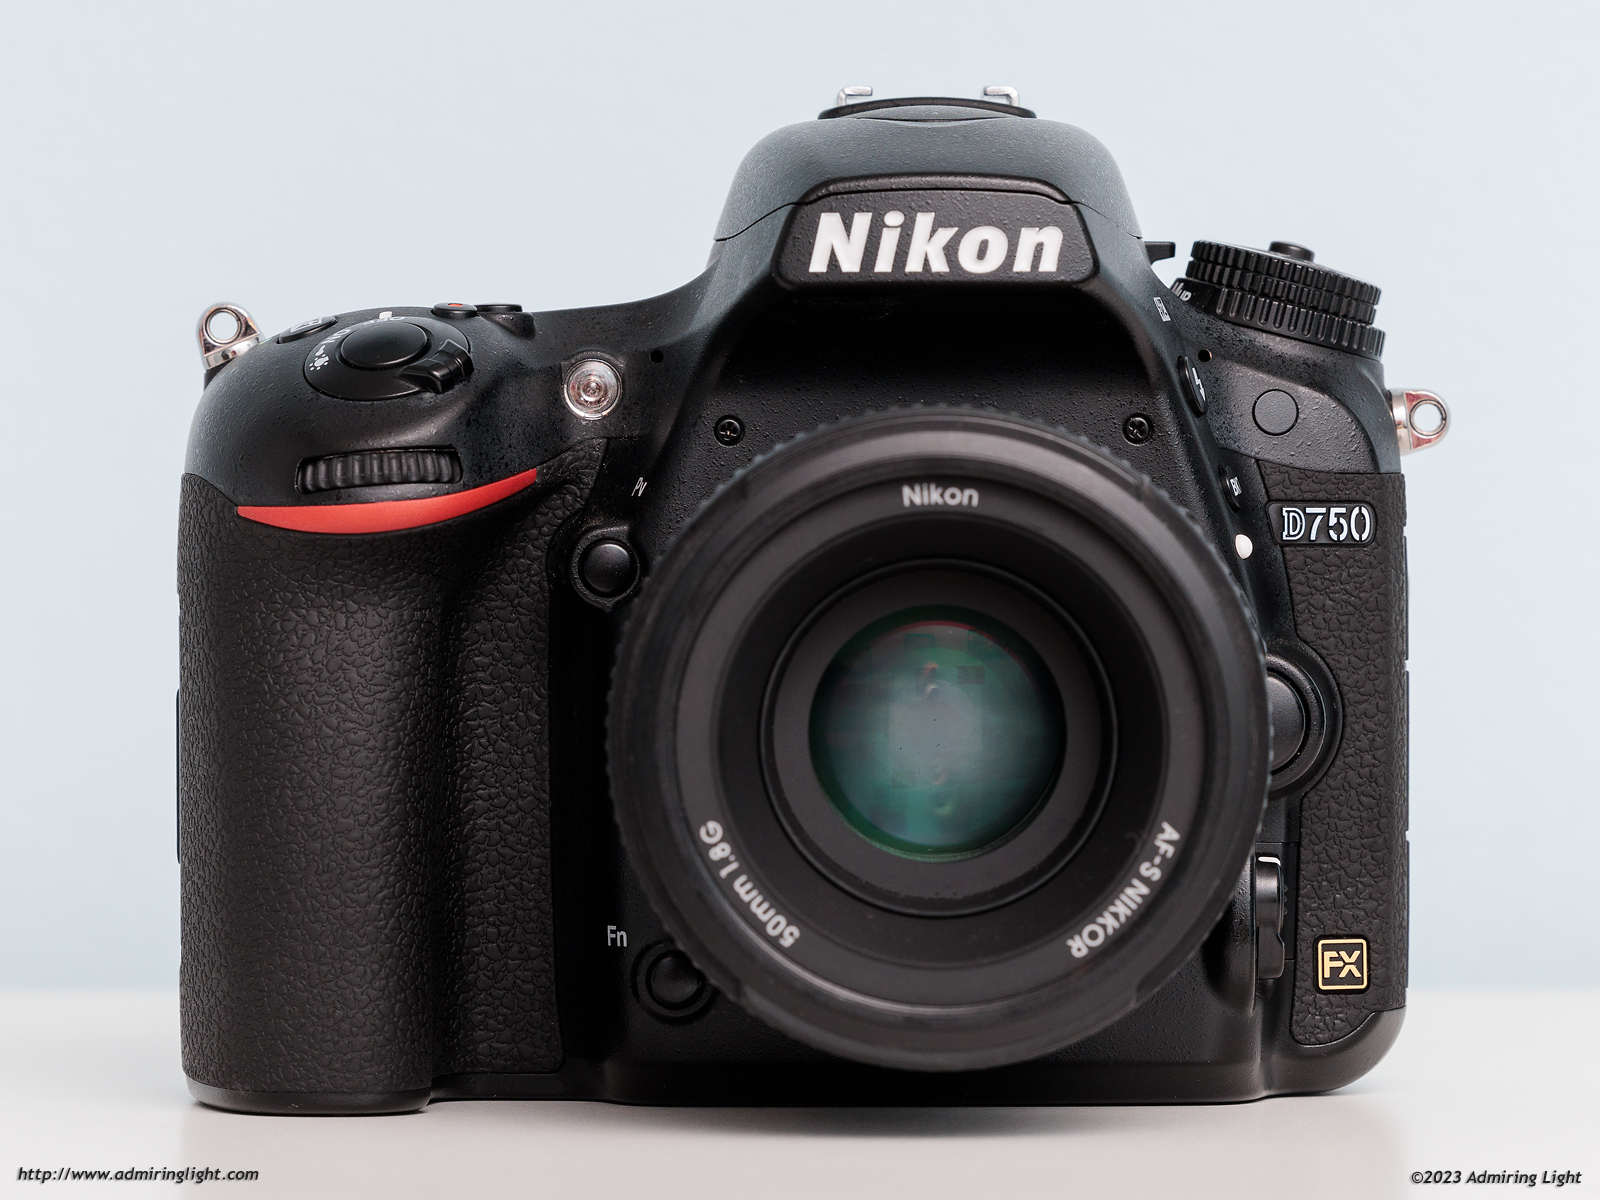 Revisiting the DSLR - Is Mirrorless Really Better? - Page 2 of 2